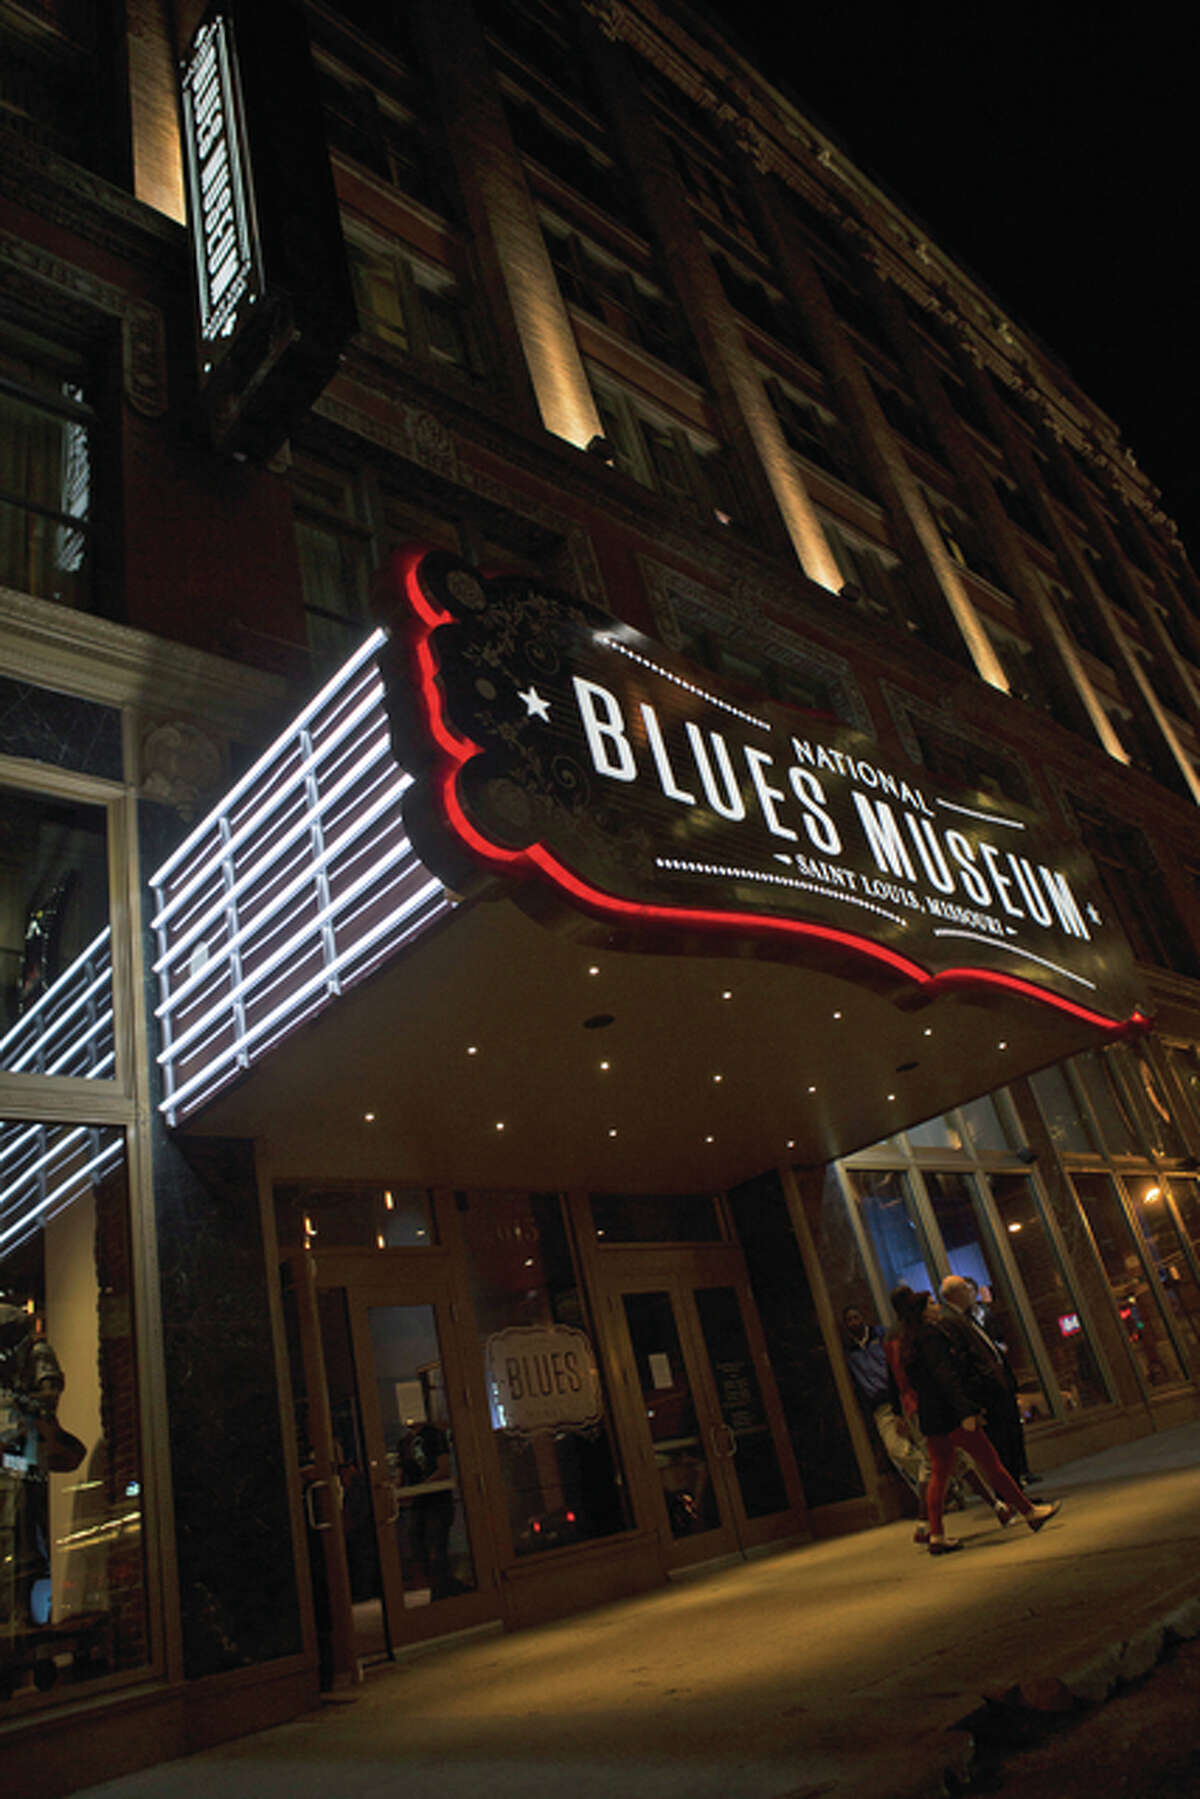 The National Blues Museum lights up the night at 615 Washington Ave. in St. Louis.